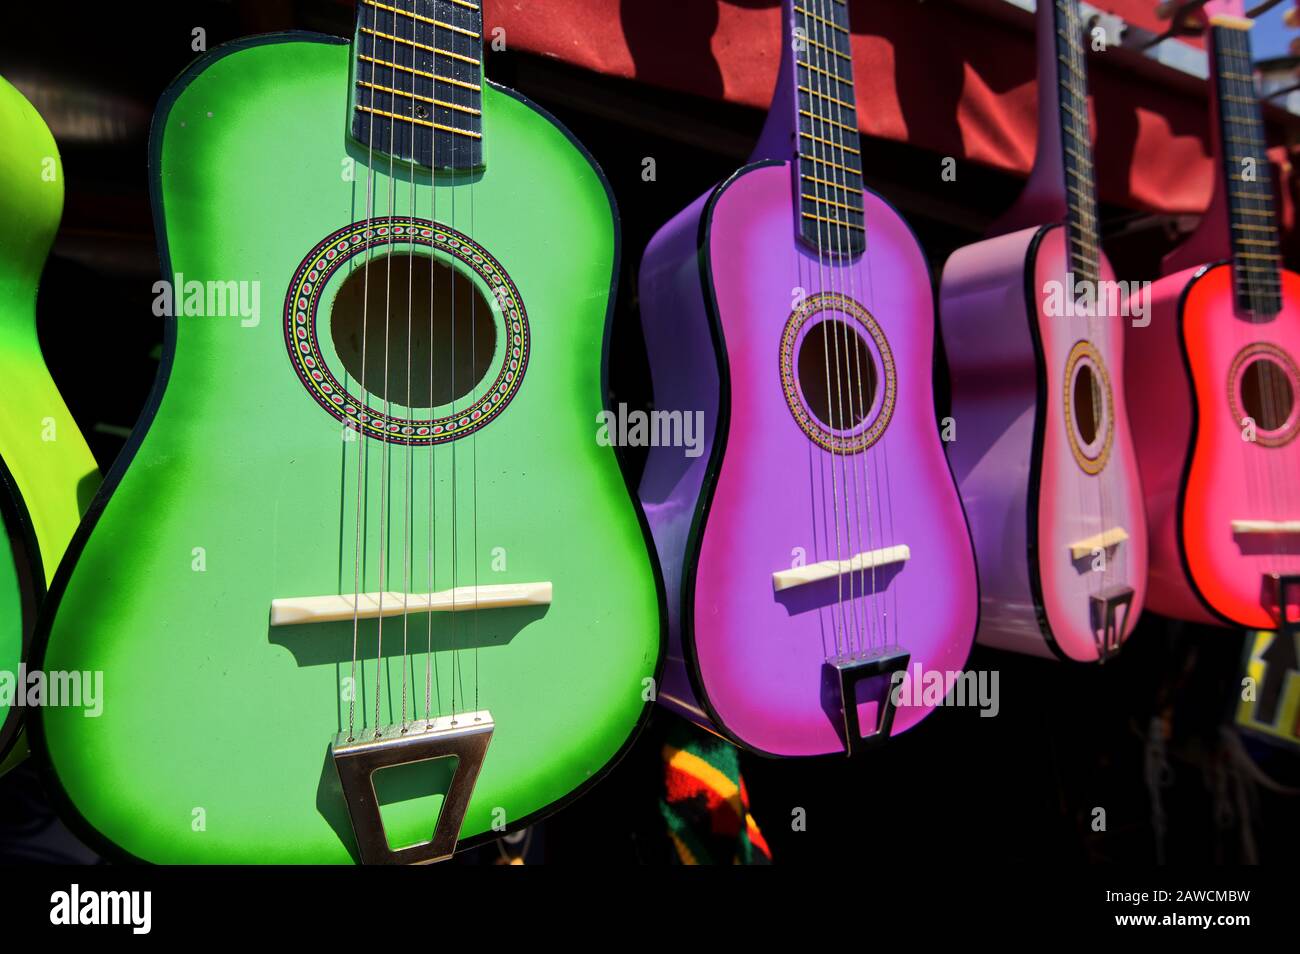 Colorful Mexican guitars on display Stock Photo